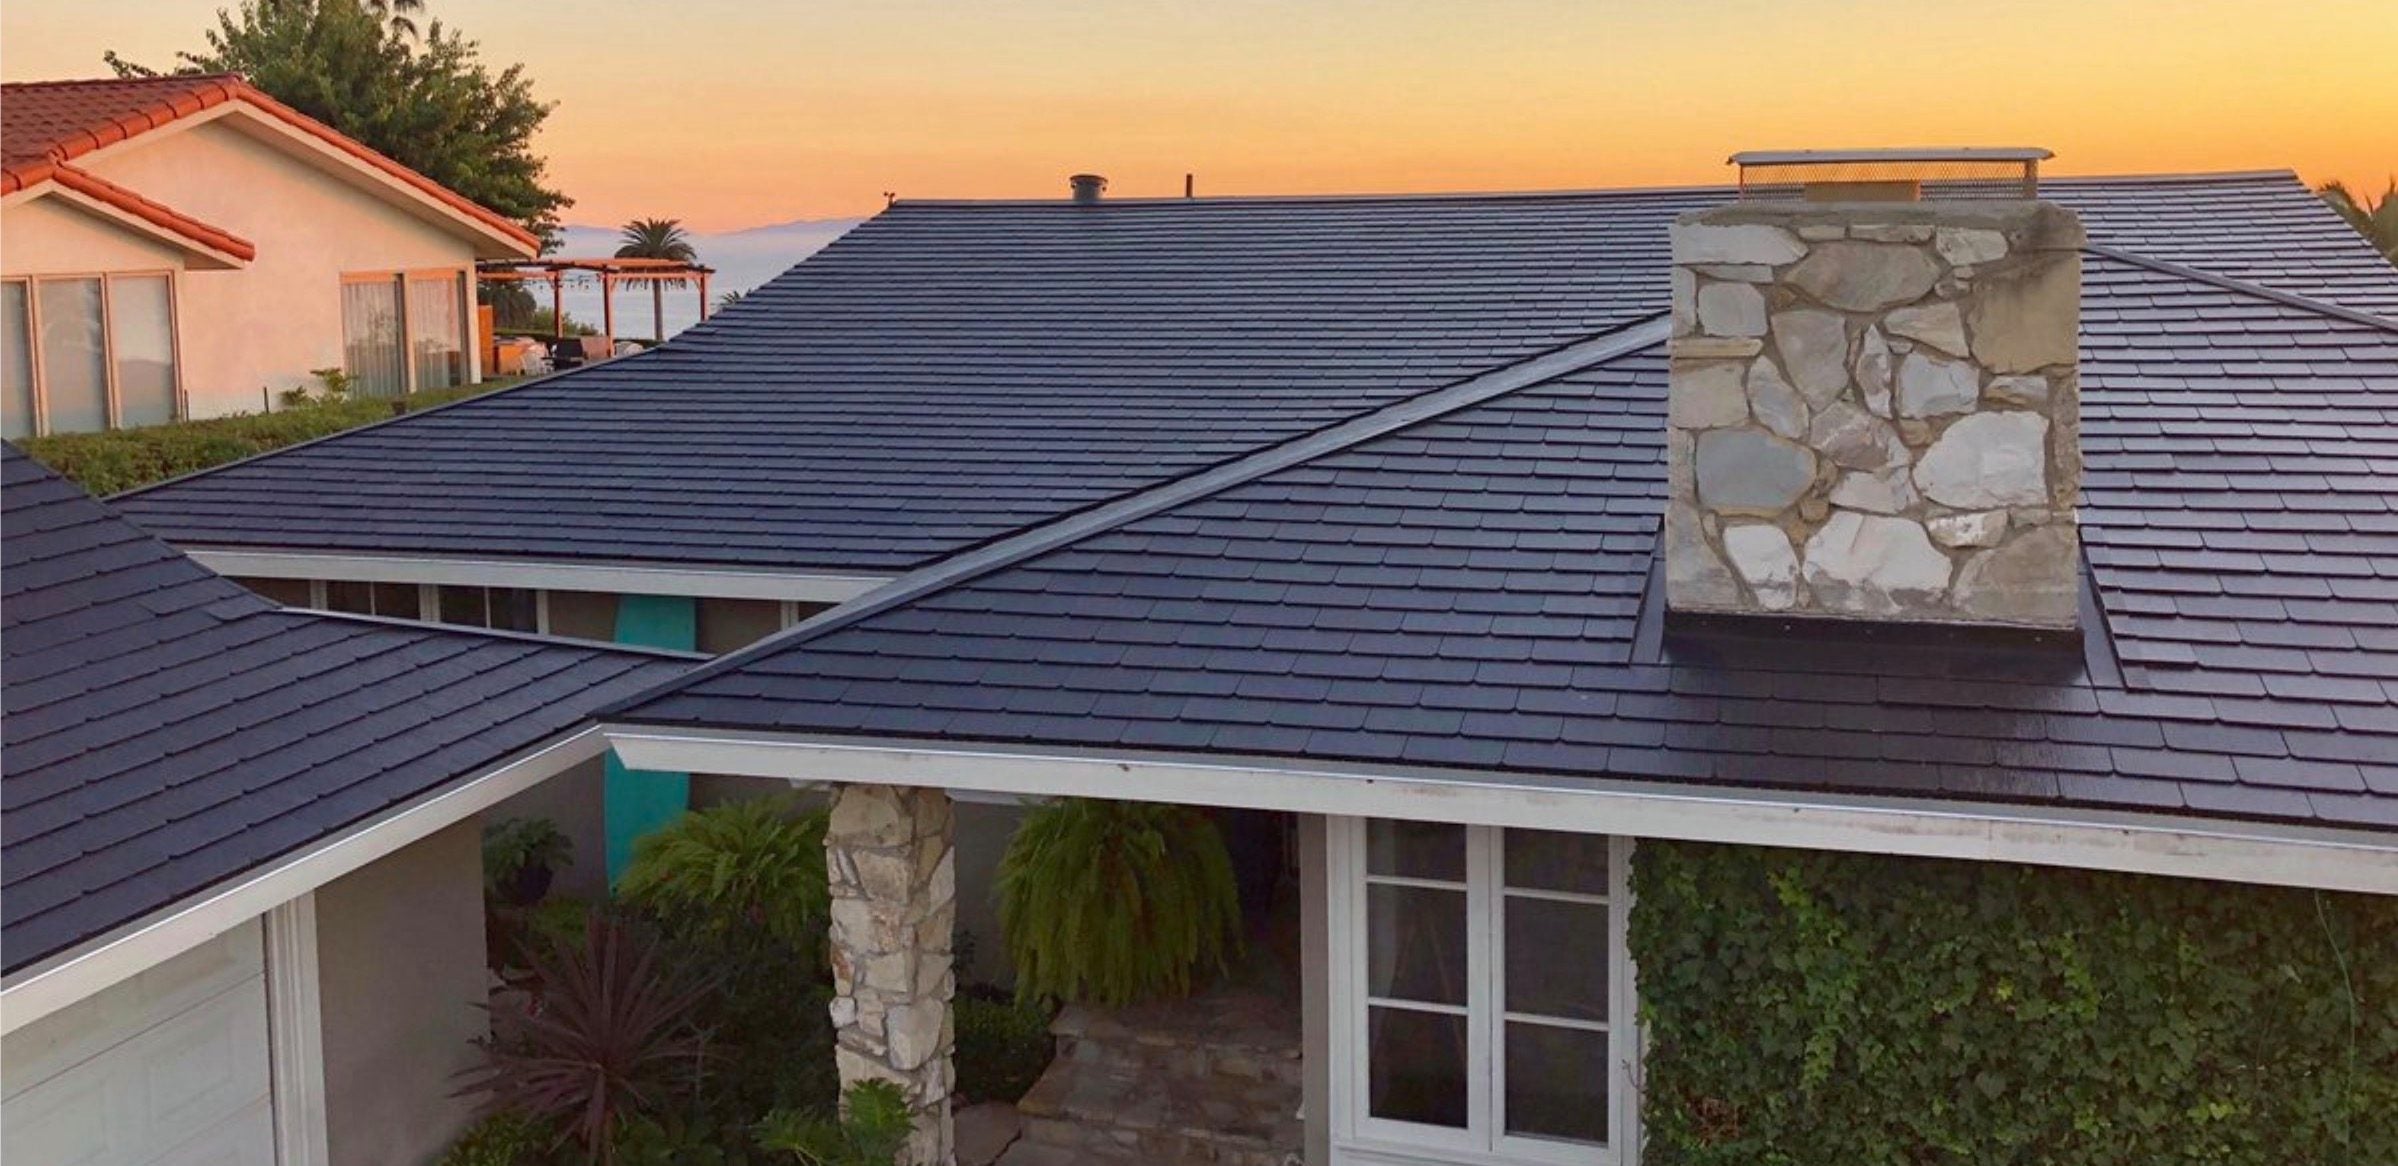 Tesla Energy Business Continues to Grow, as Solar Roof will soon be Deployed in Australia